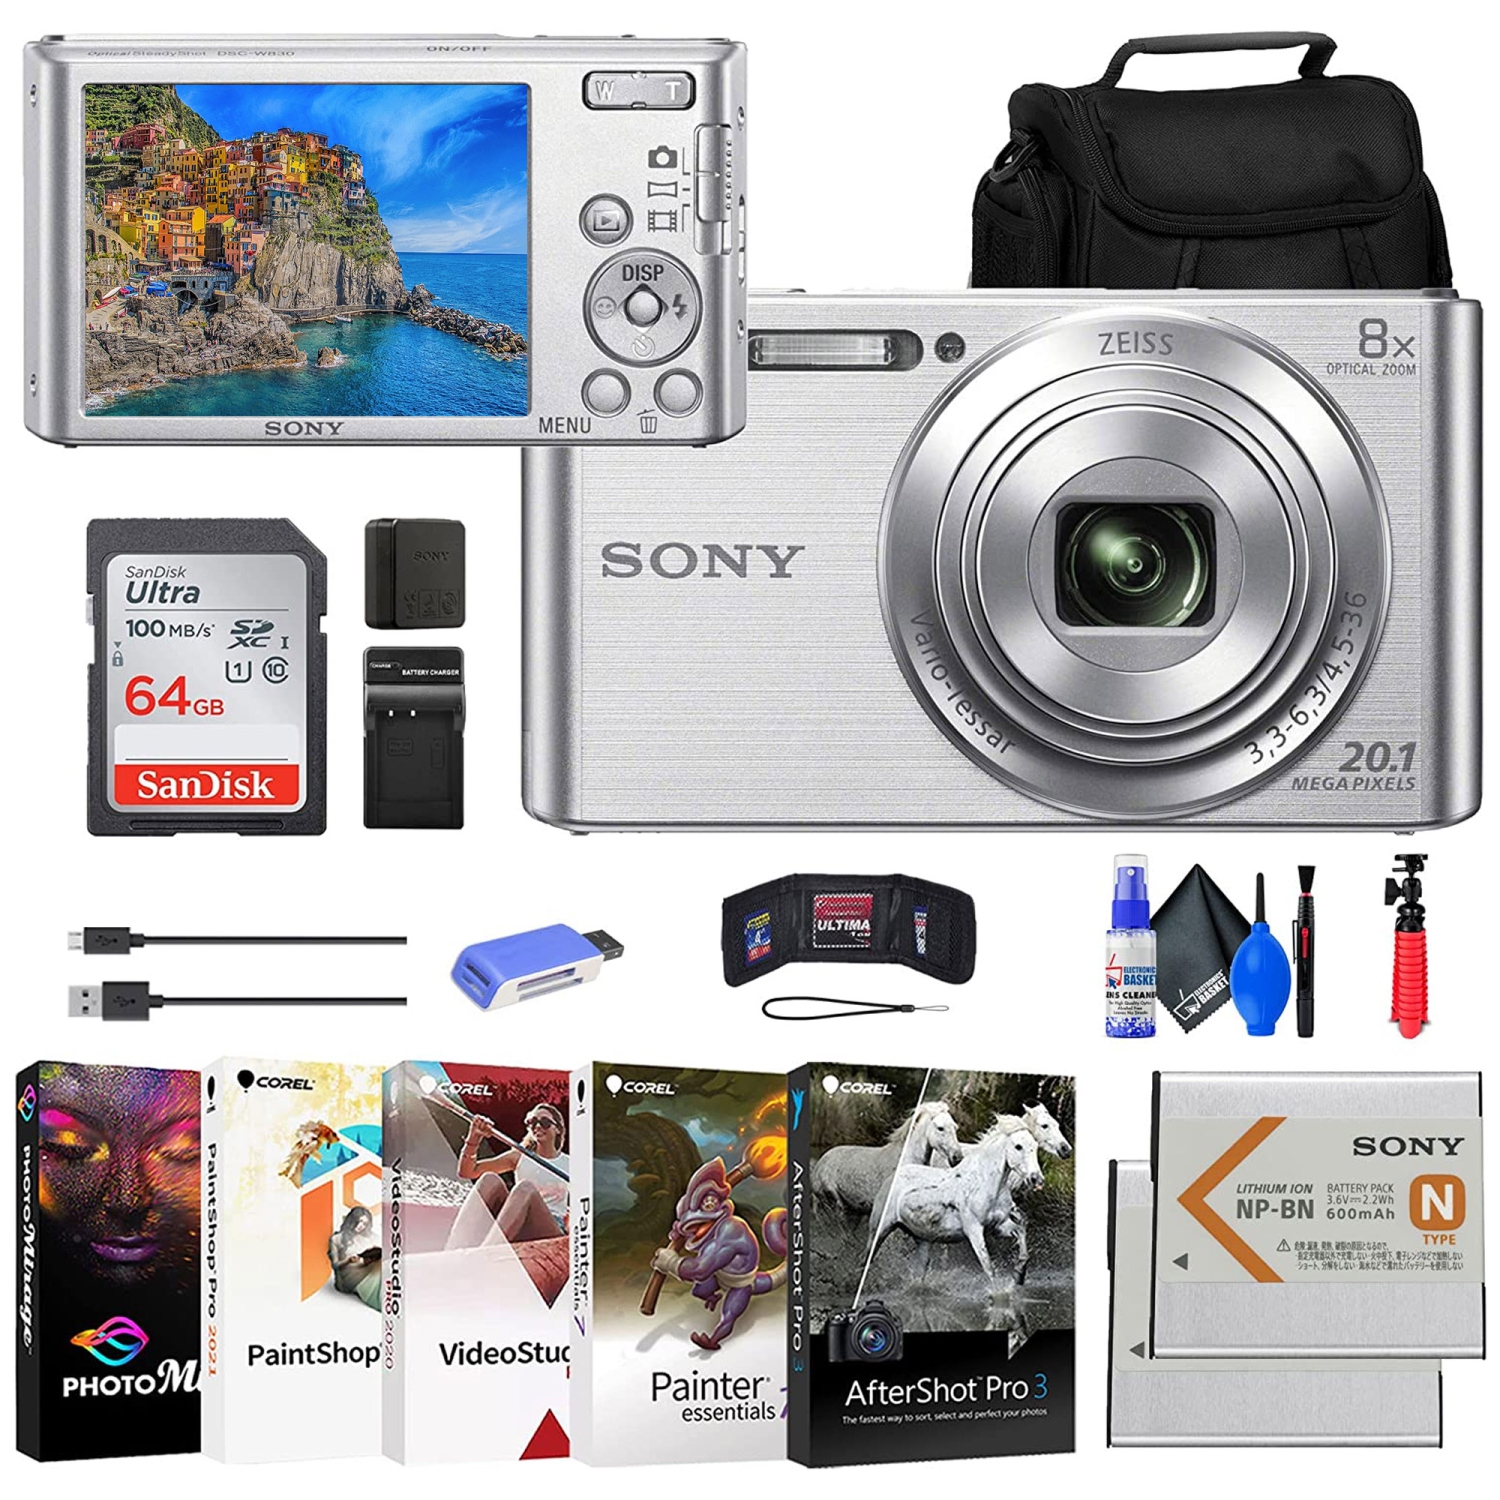 Sony DSC-W830 Digital Camera + NP-BN1 Battery + Case + Charger + 64GB + More